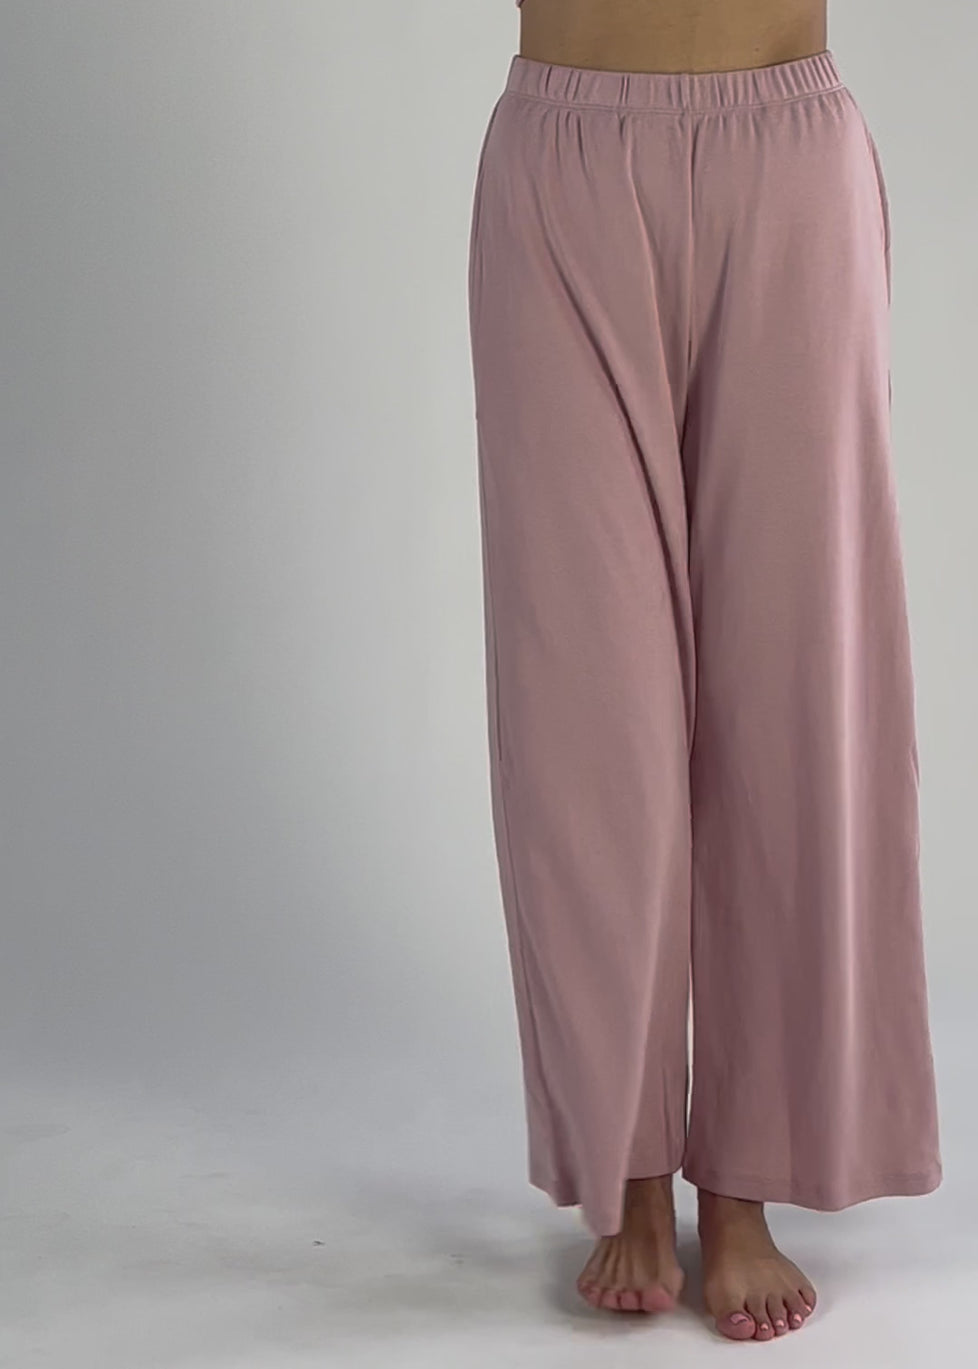 BOODY DOWNTIME WIDE LEG LOUNGE PANT - Southern Accents MS